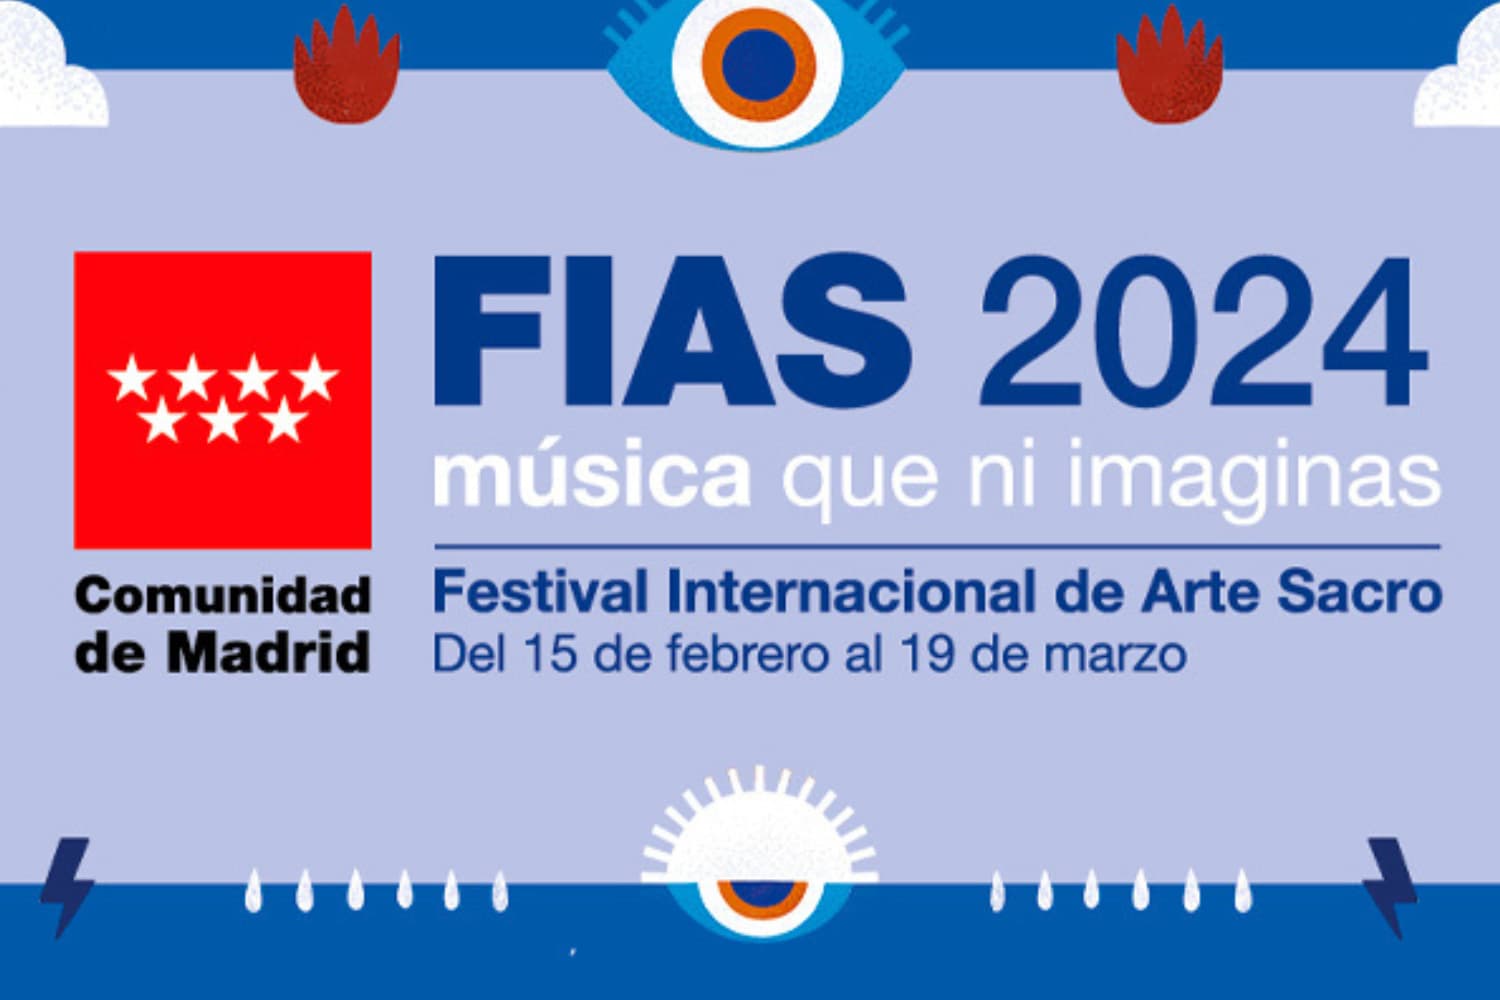 he 34th edition of the International Festival of Sacred Art (FIAS) arrives